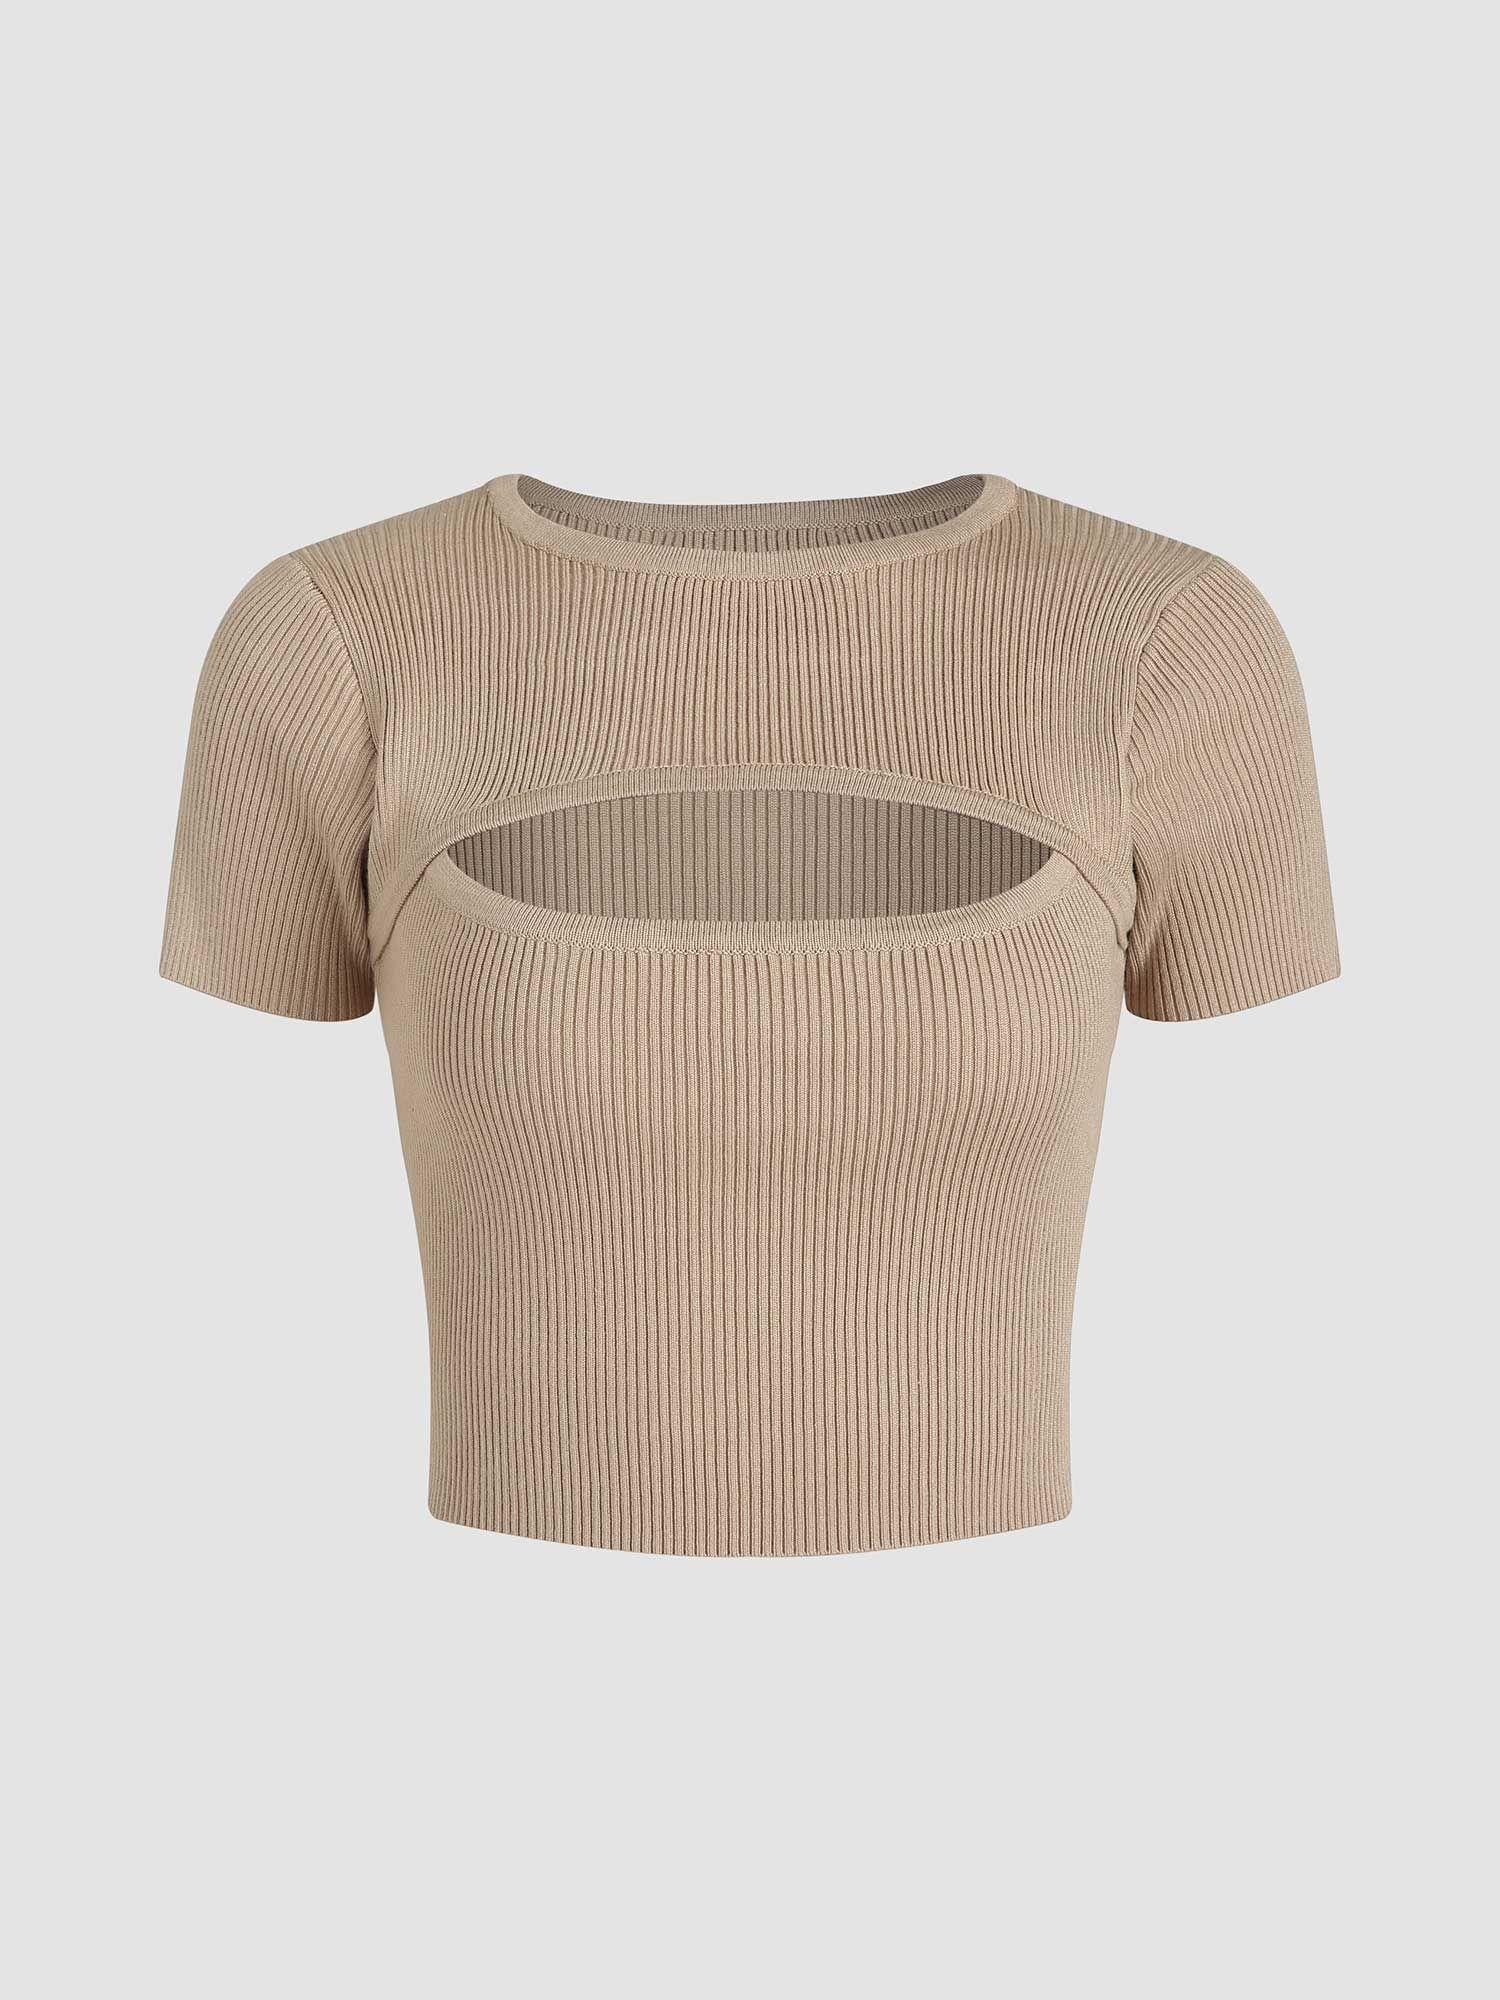 solid cut out knit top